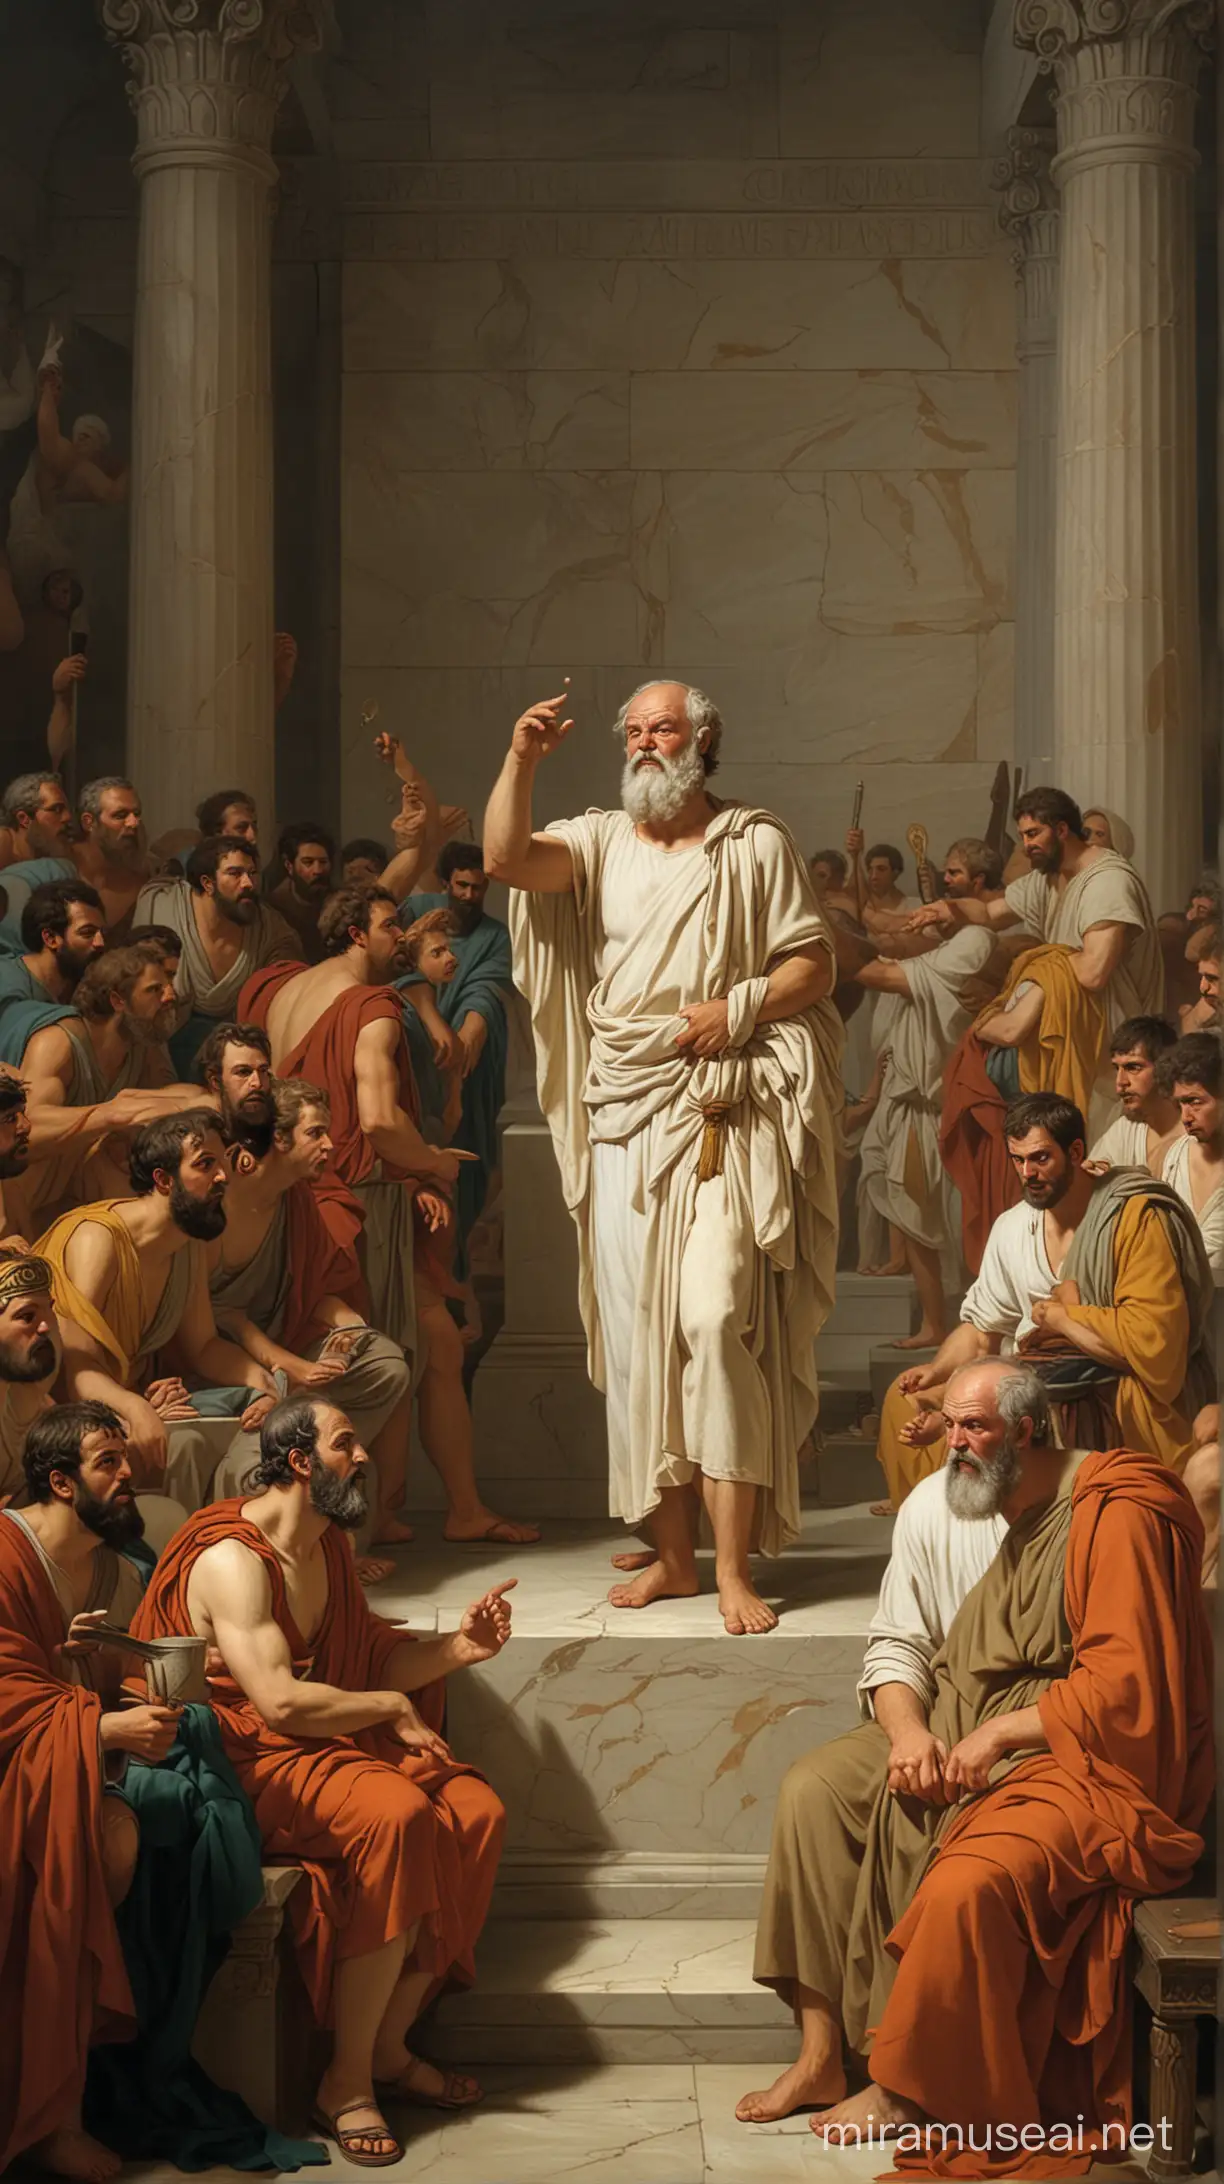  In the imposing chamber of an Athenian court, Socrates is depicted passionately defending himself. The diverse expressions of the jury and spectators reflect the atmosphere of the trial. Socrates' determined gaze and gestures emphasize the bold and passionate nature of his defense.